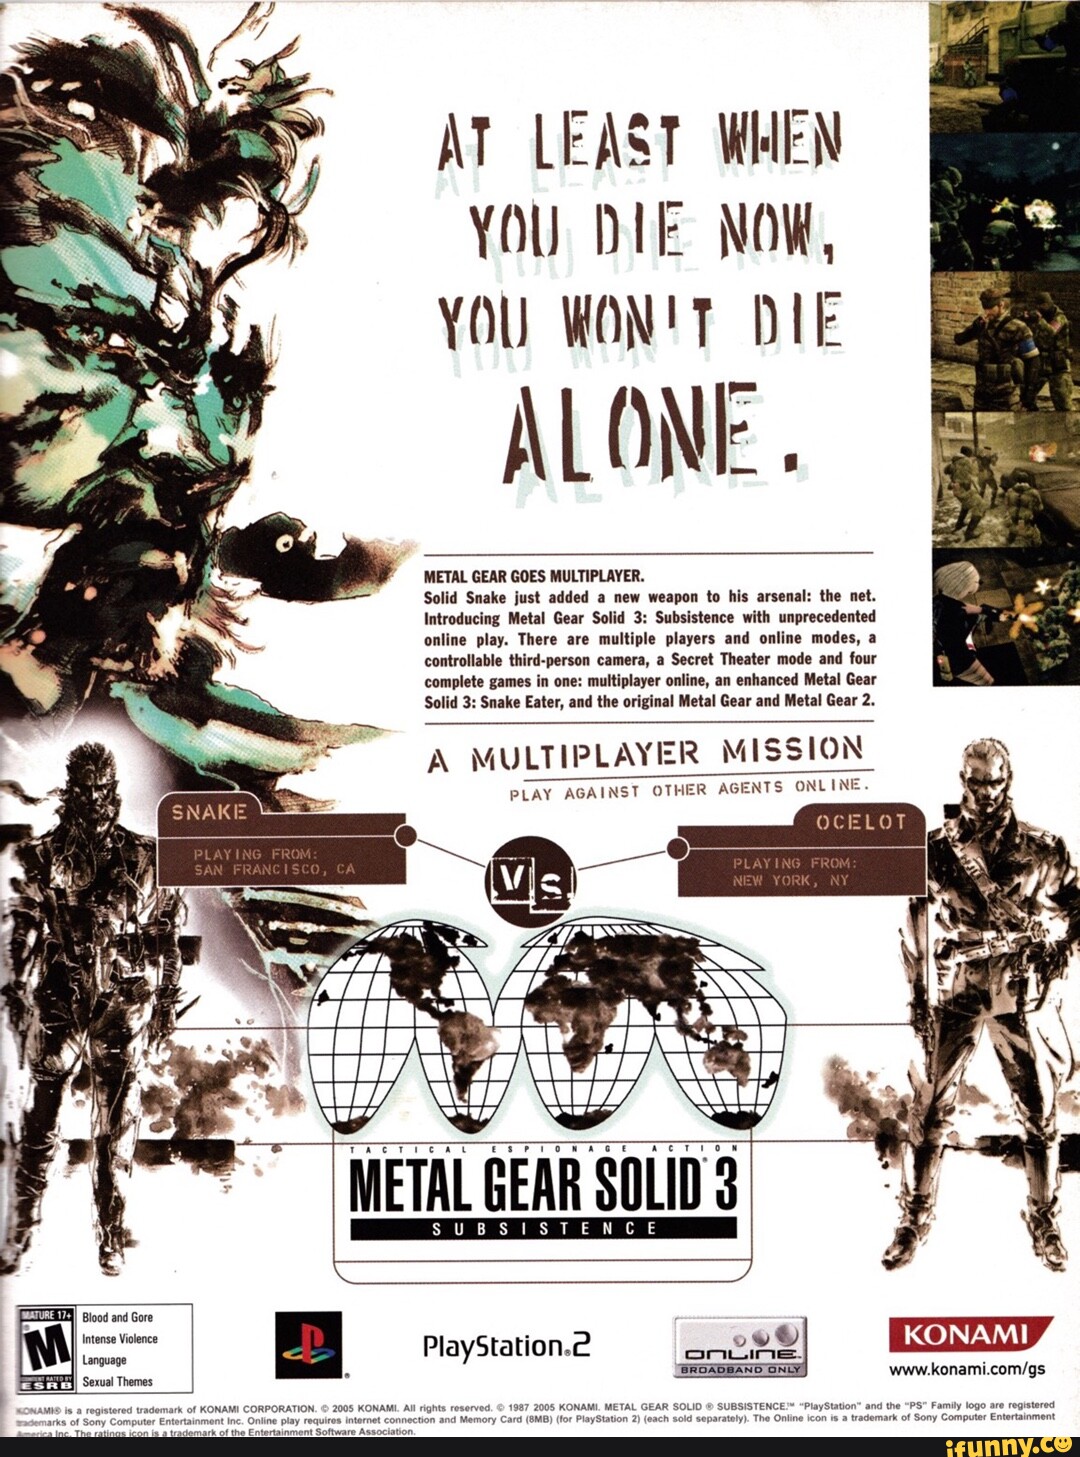 Metal Gear Solid 5: Everything you need to know before playing - CNET